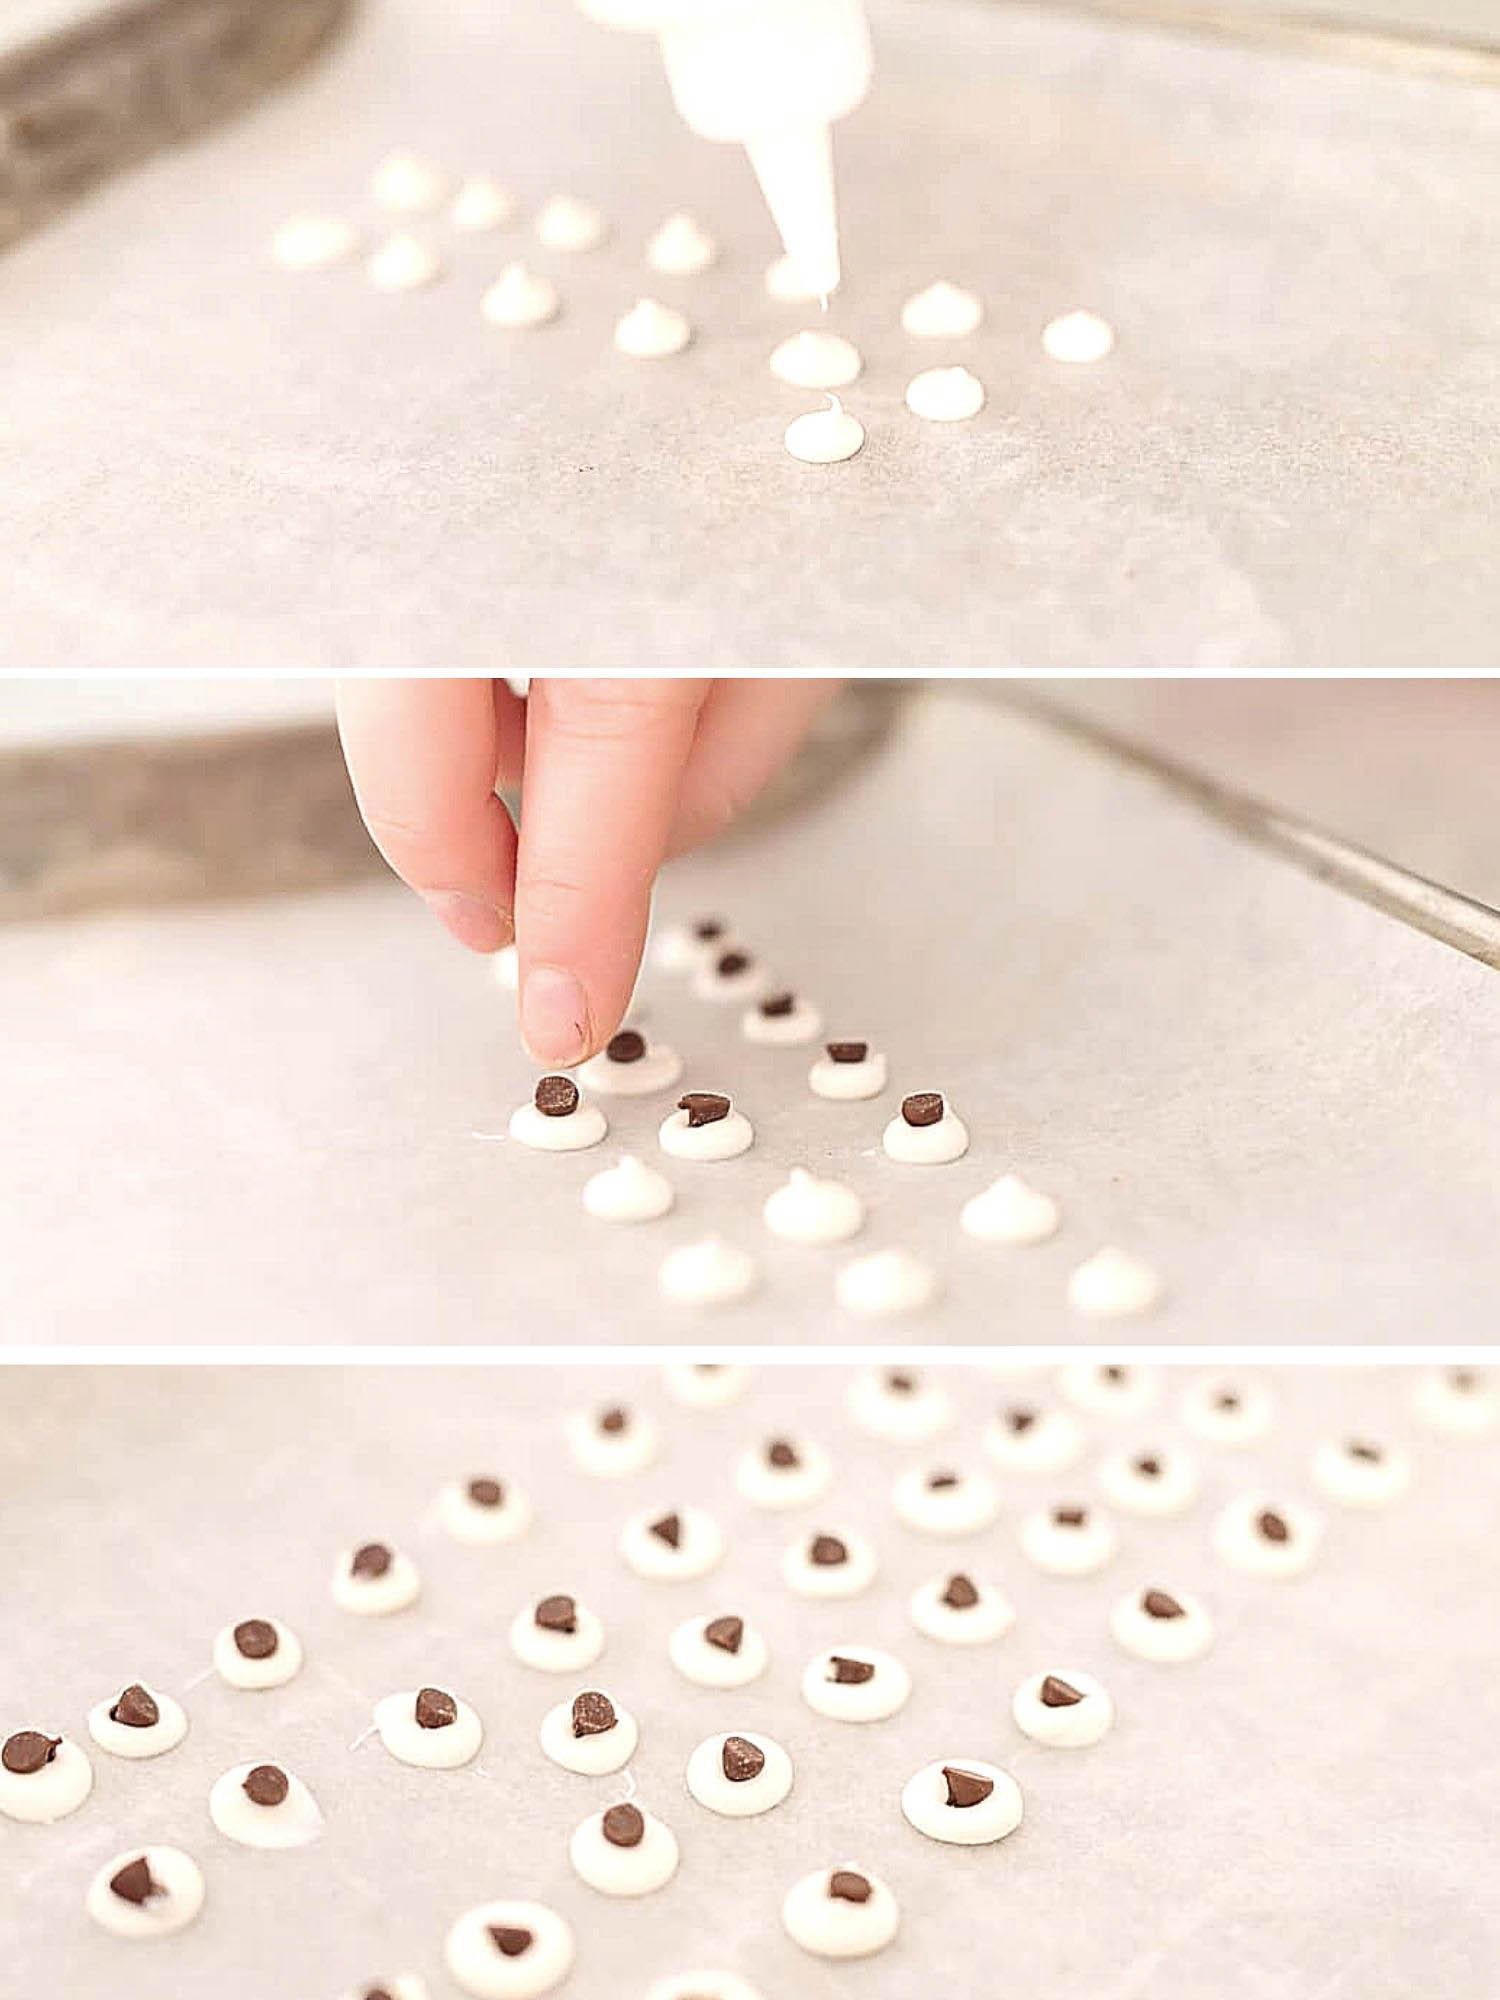 three instructional images showing process of making edible cookie eyes such as squeezing white chocolate out of bottle, pushing in chocolate chip and cooling.